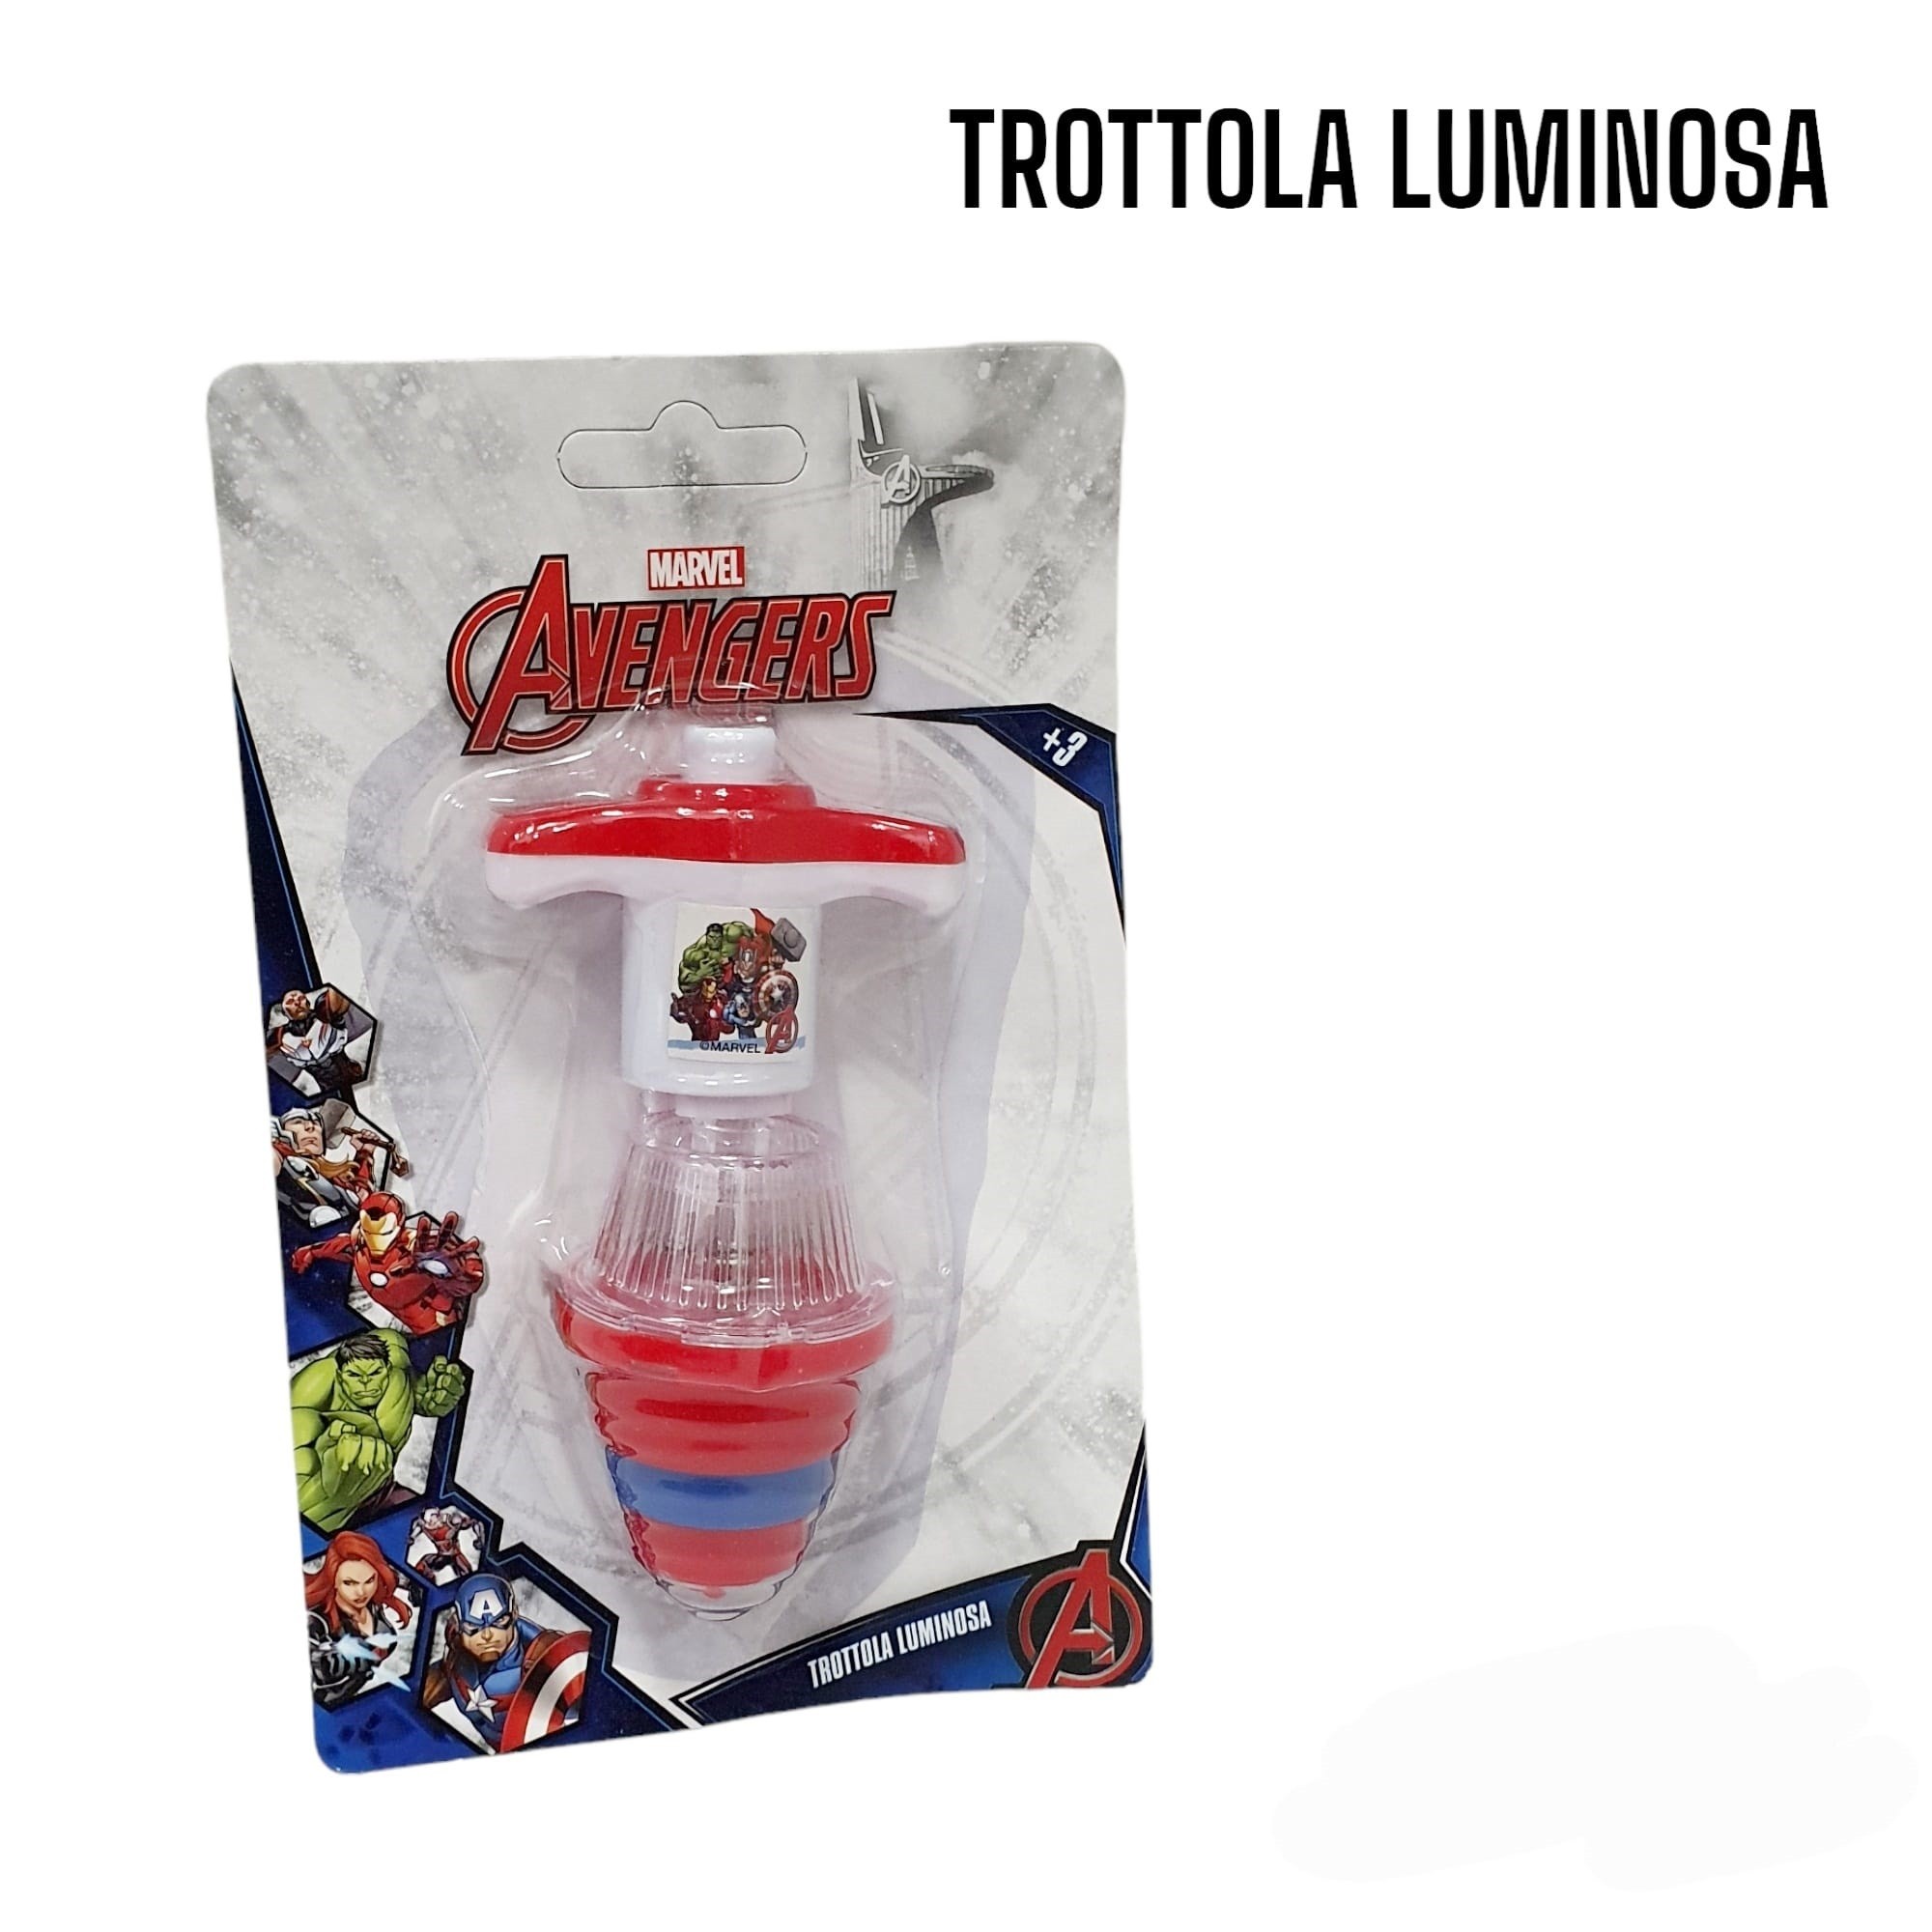 gadget-compleanno-gioco-trottola-luminosa-in-blister-avengers